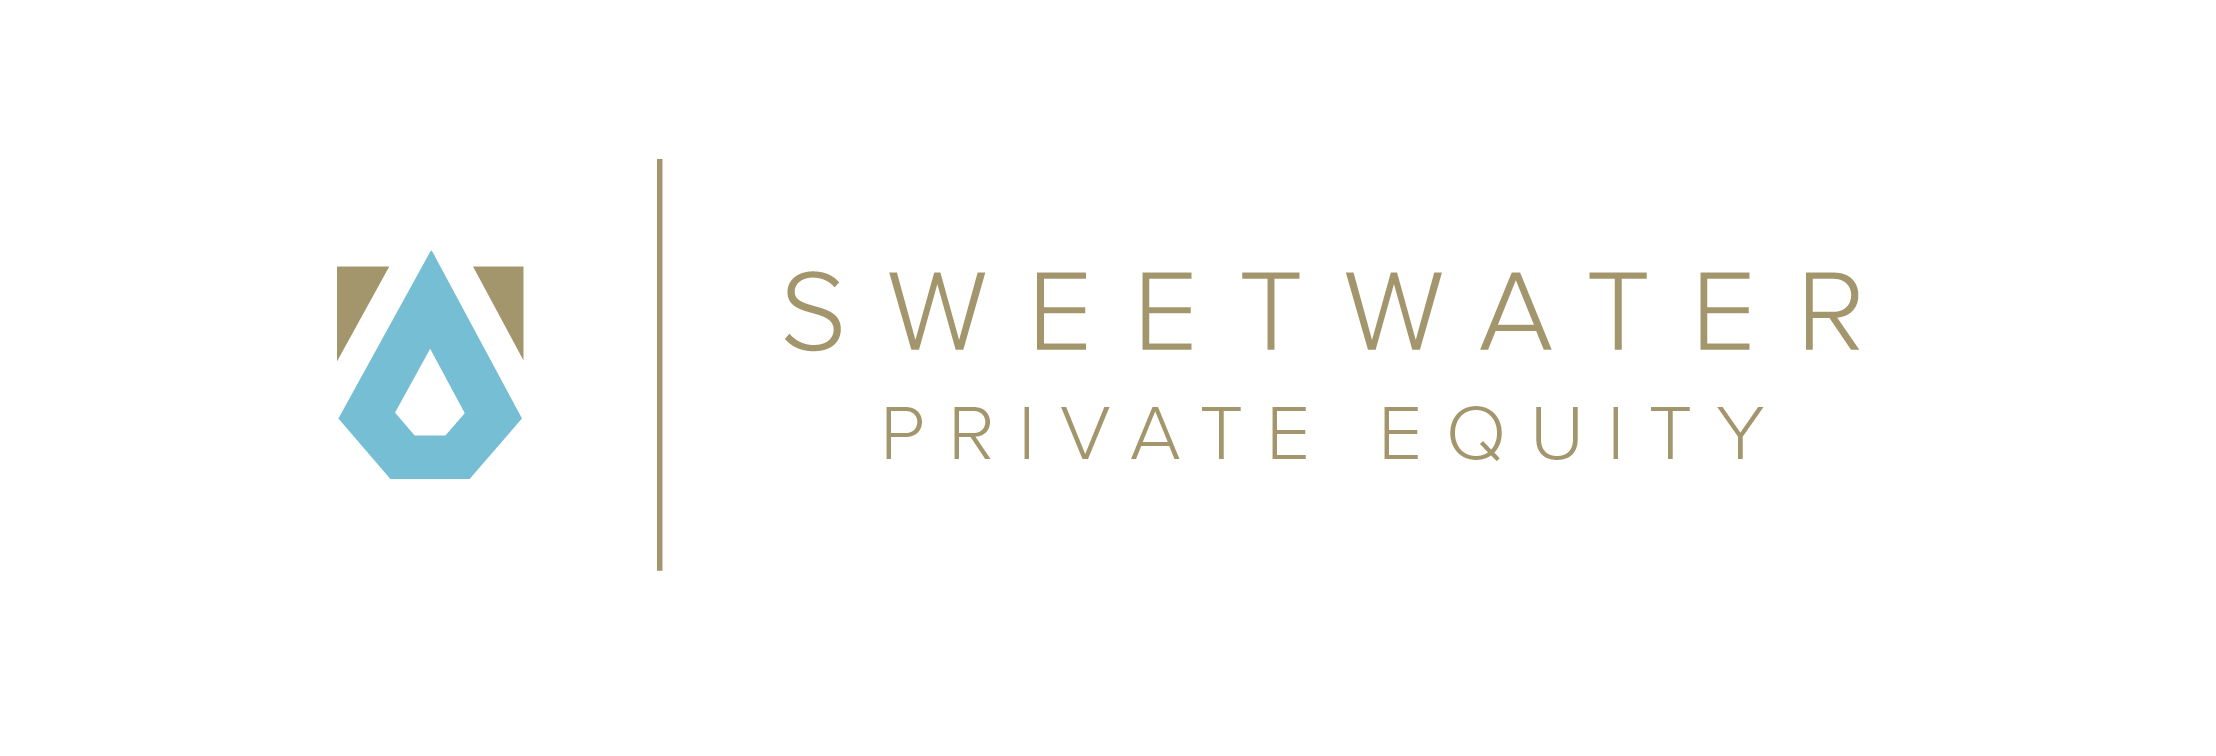 Sweetwater Capital Partners